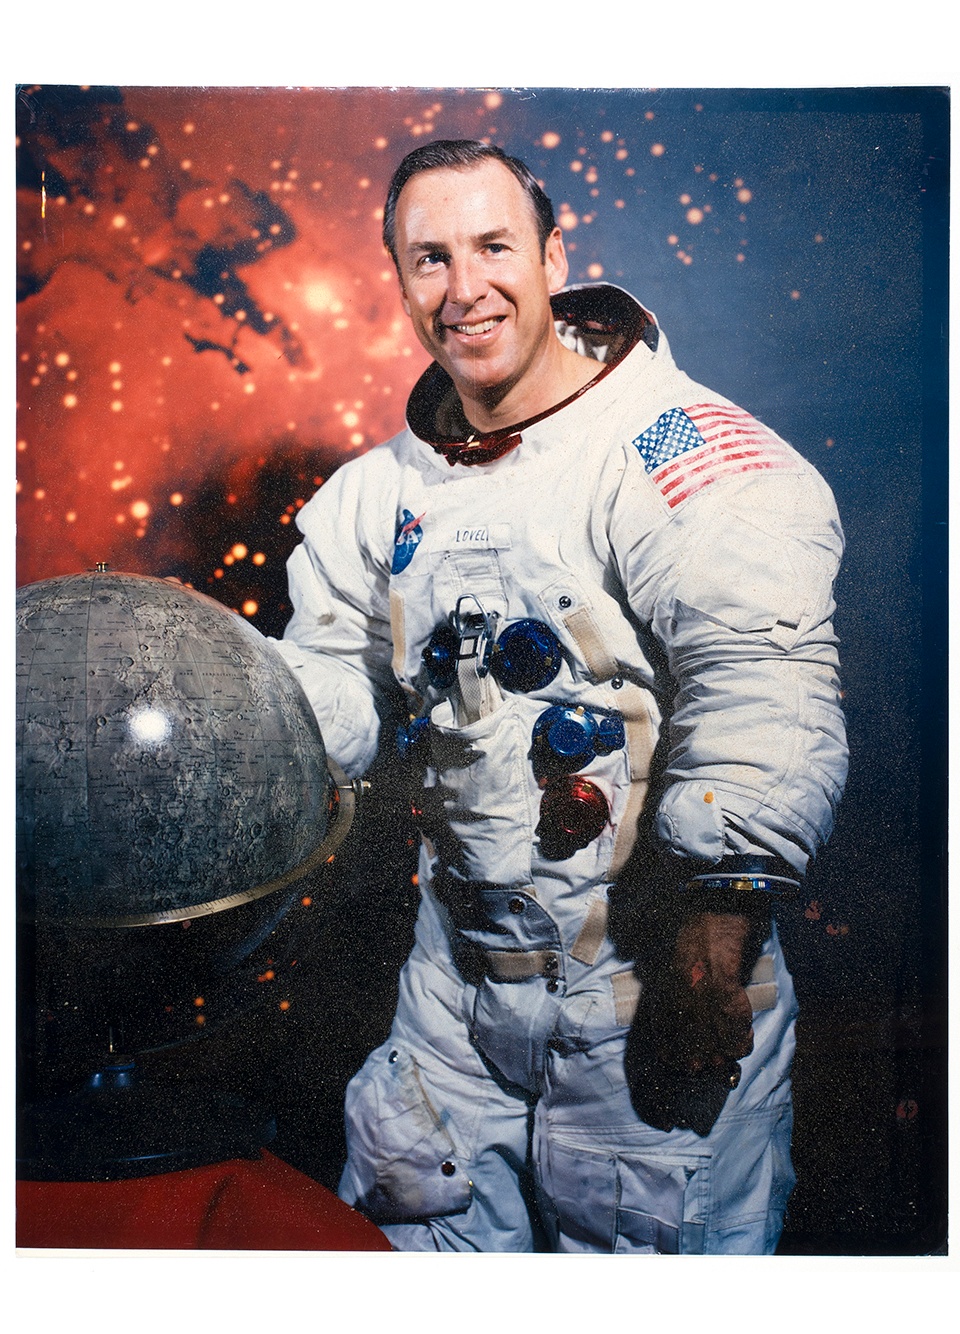 Photographic portrait of a man in a space suit smiling with one hand on a globe and an image of a galaxy in the background.